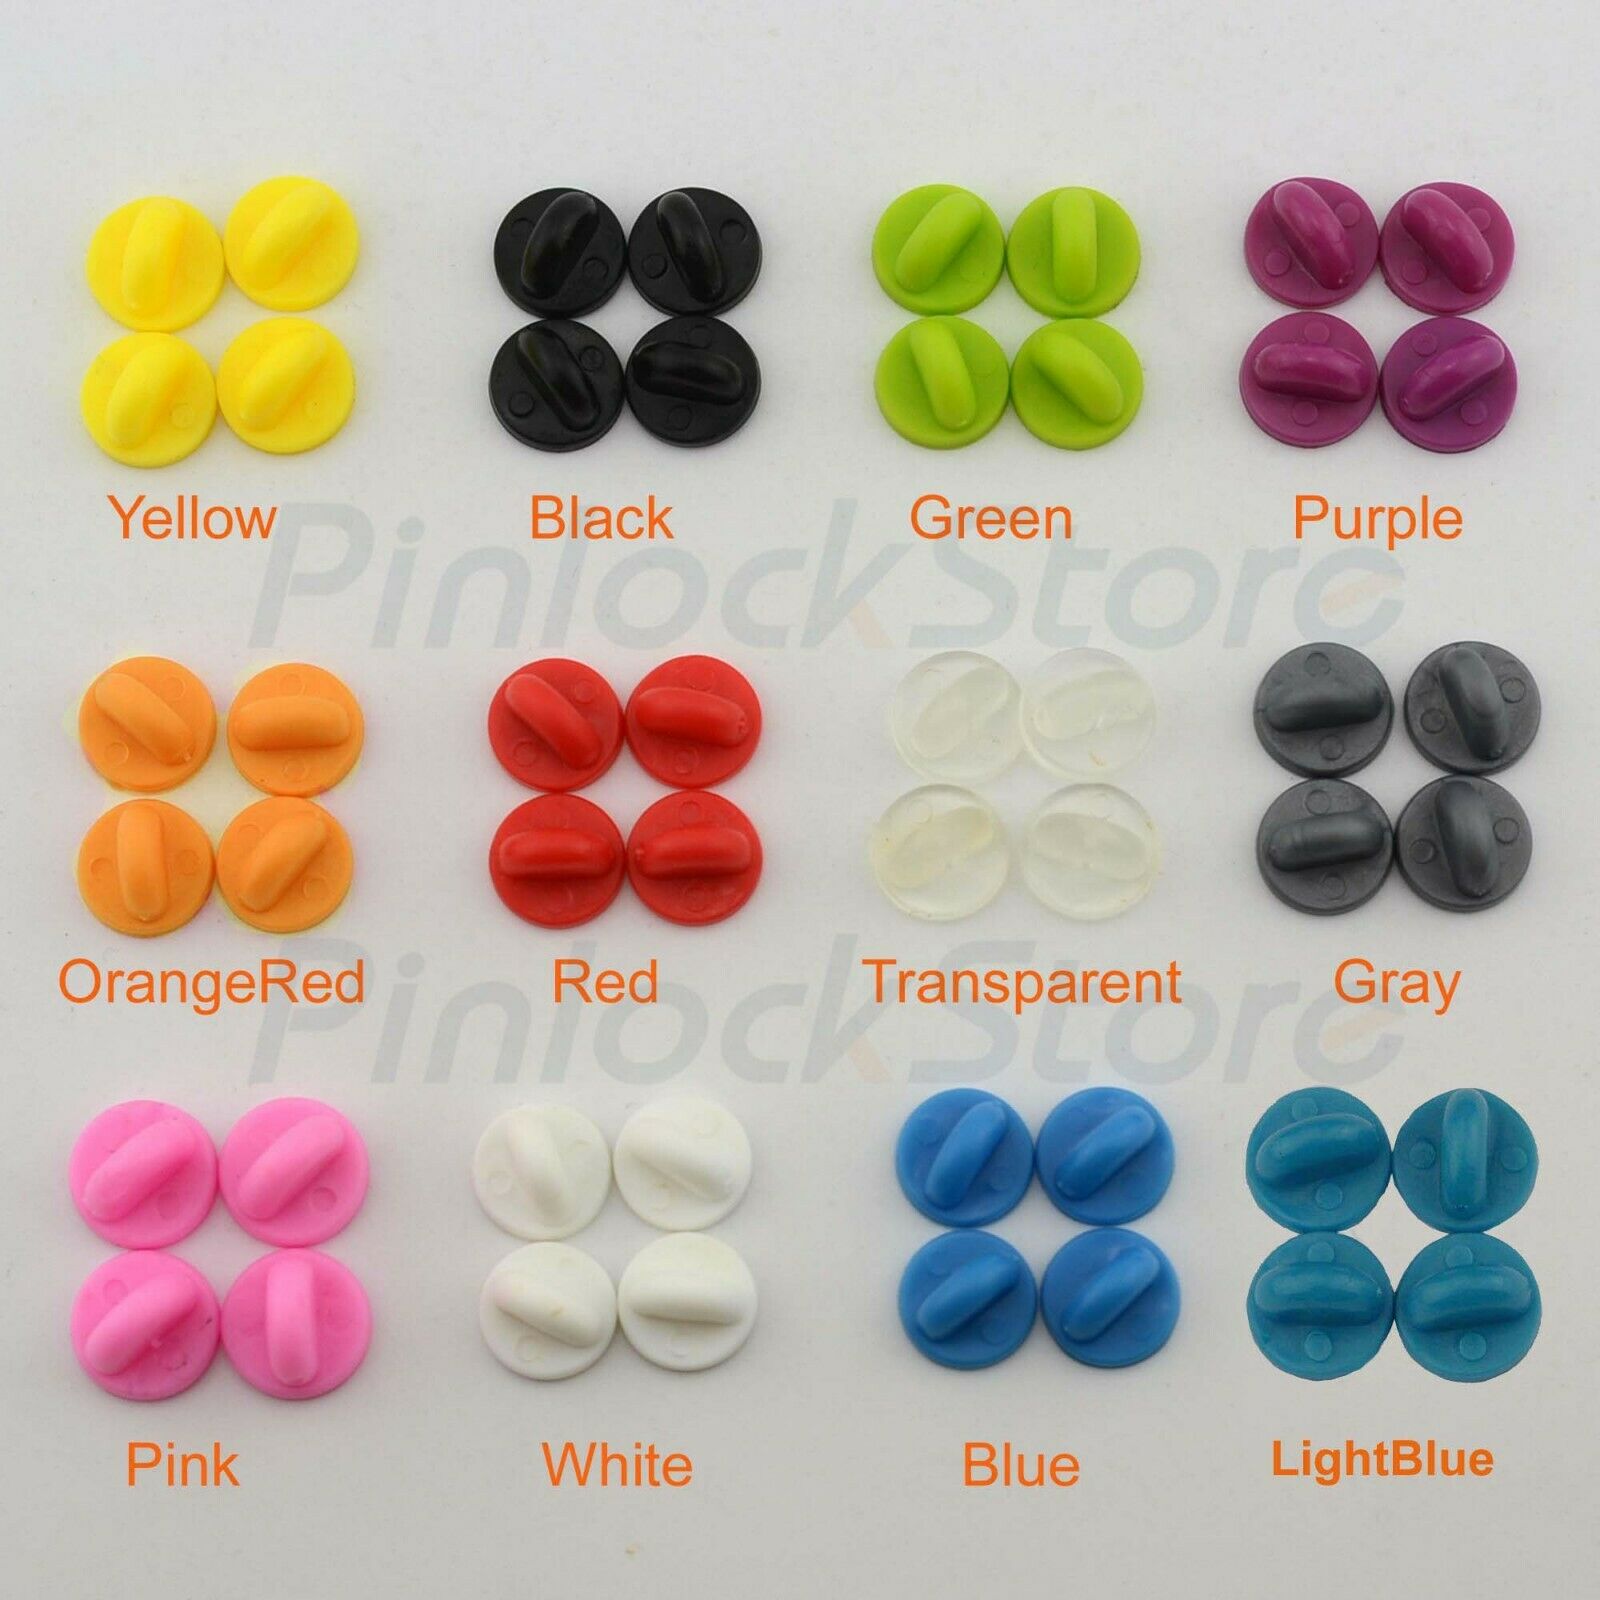 Rubber Pin Backs PVC Lapel Pin Backs Clasps/Clutch for Pin Post Pins/Badges